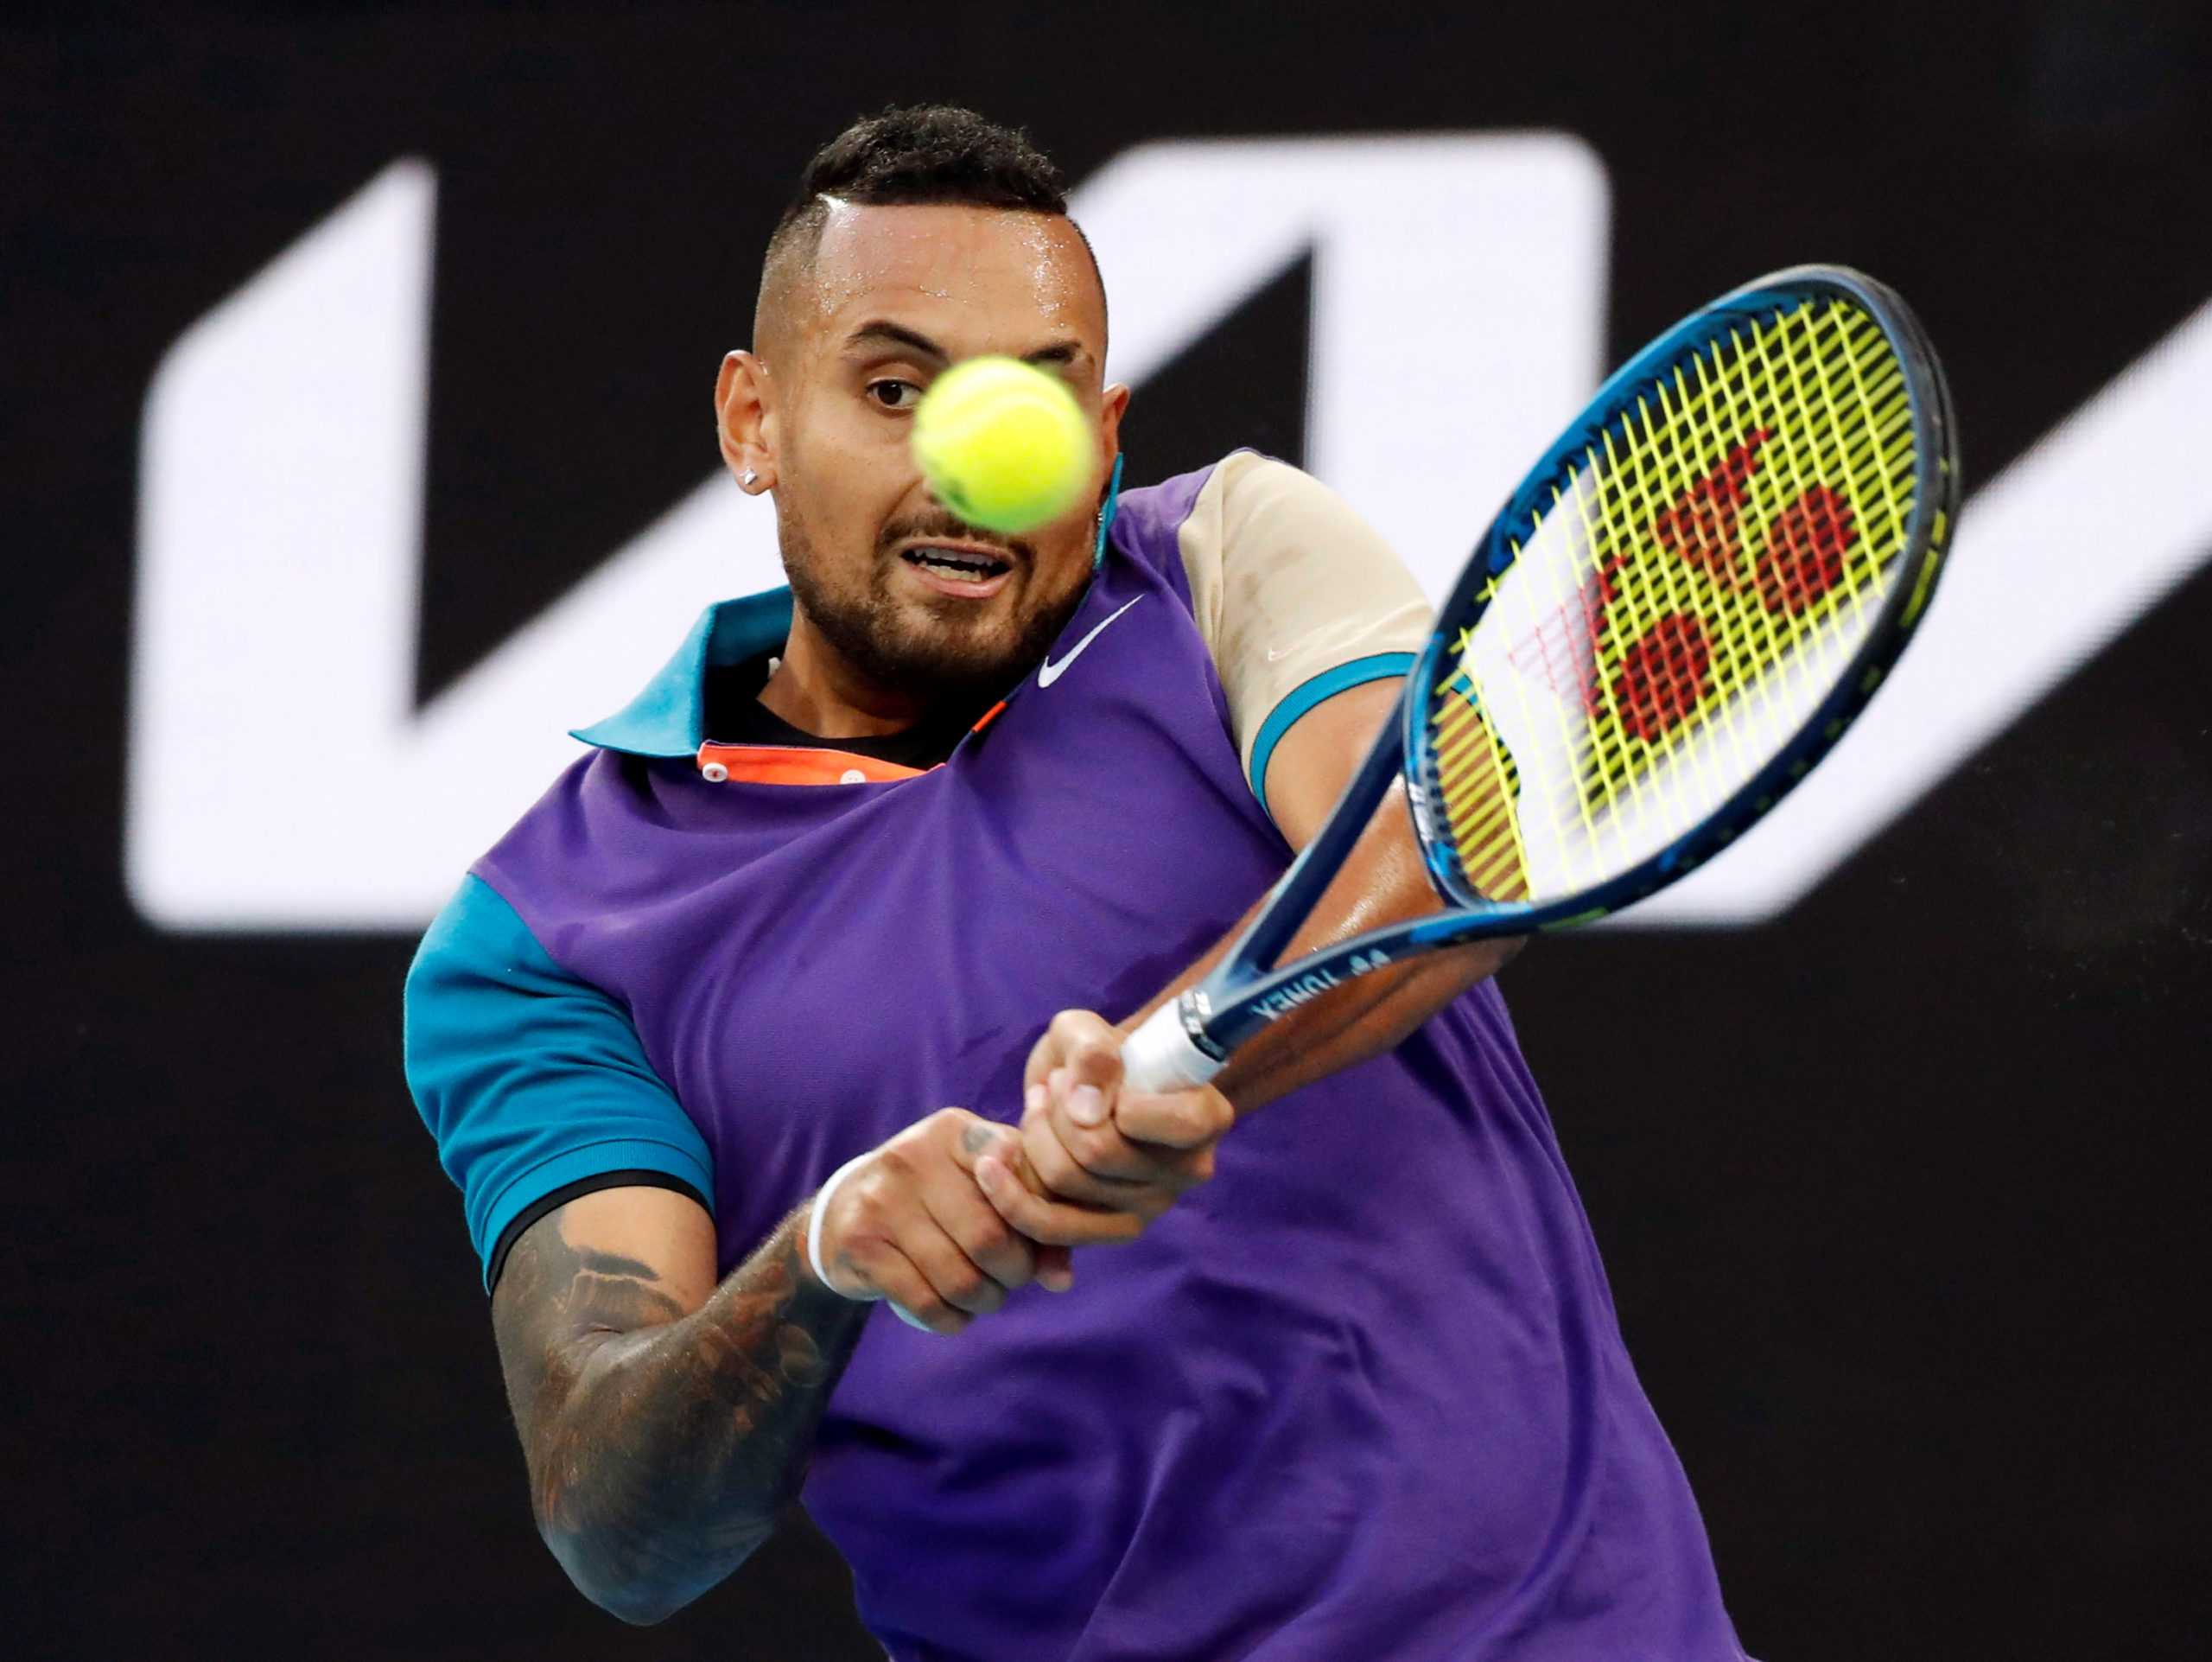 Kyrgios raises the roof with epic comeback in Australian Open